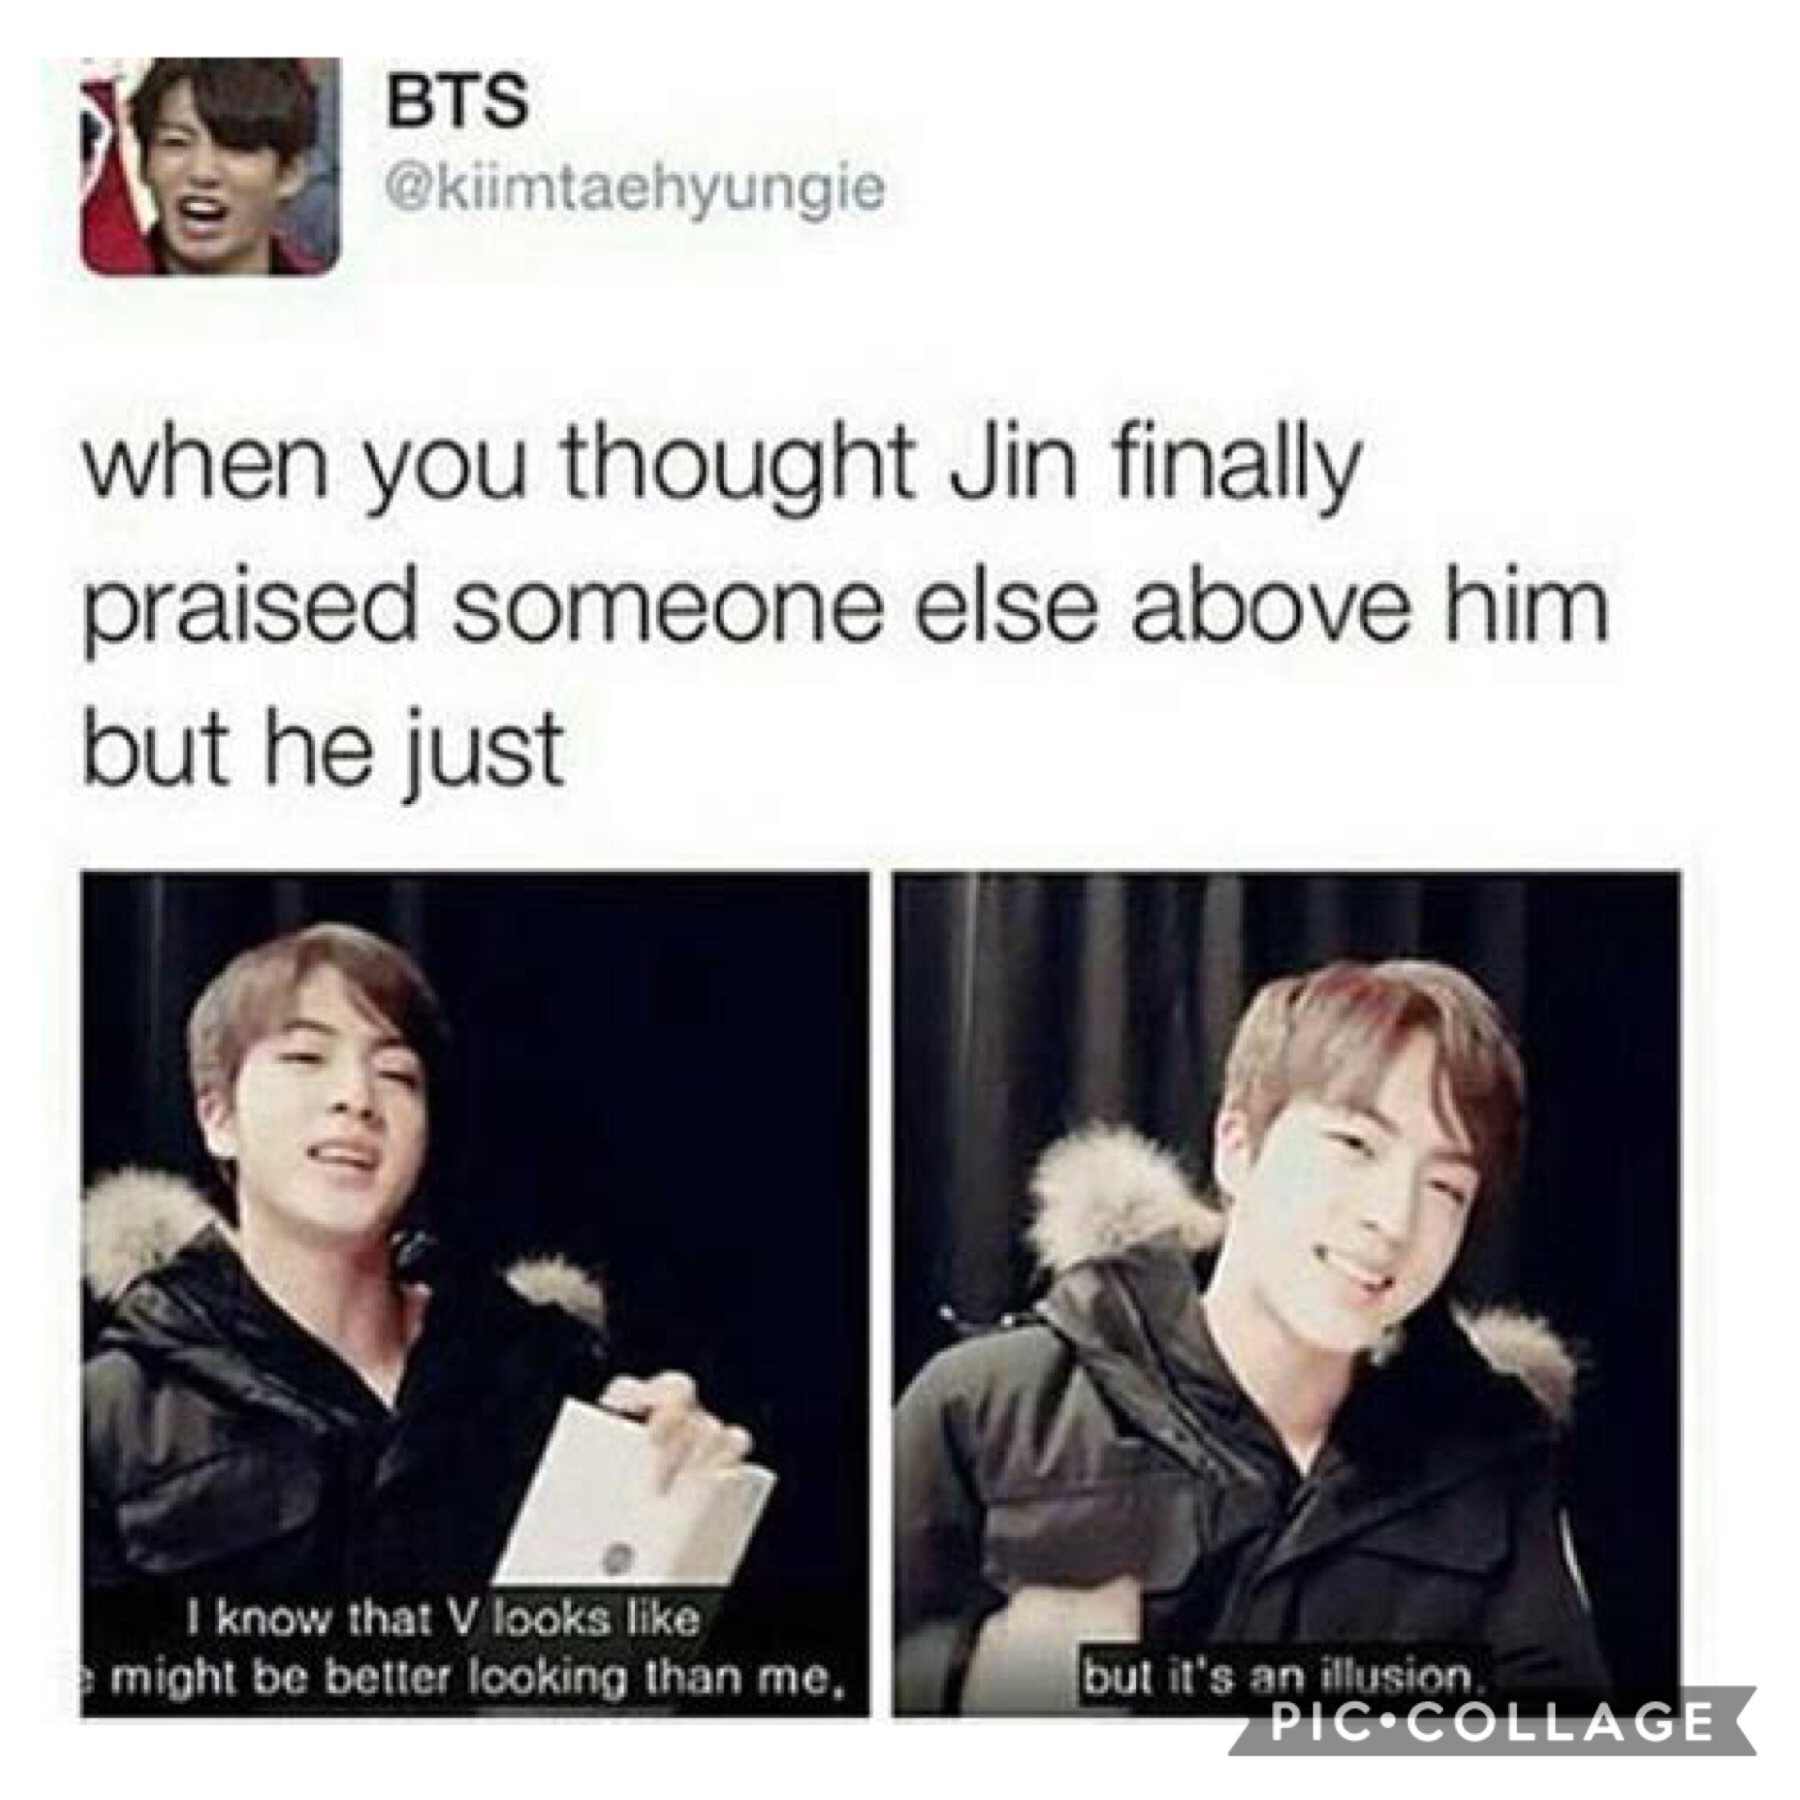 currently 11:27 right now 💫 I should be asleep, I have to wake up early anyway tomorrow T-T 😅😩 enjoy a Jin meme, cause you never can have enough of jiN 💛 